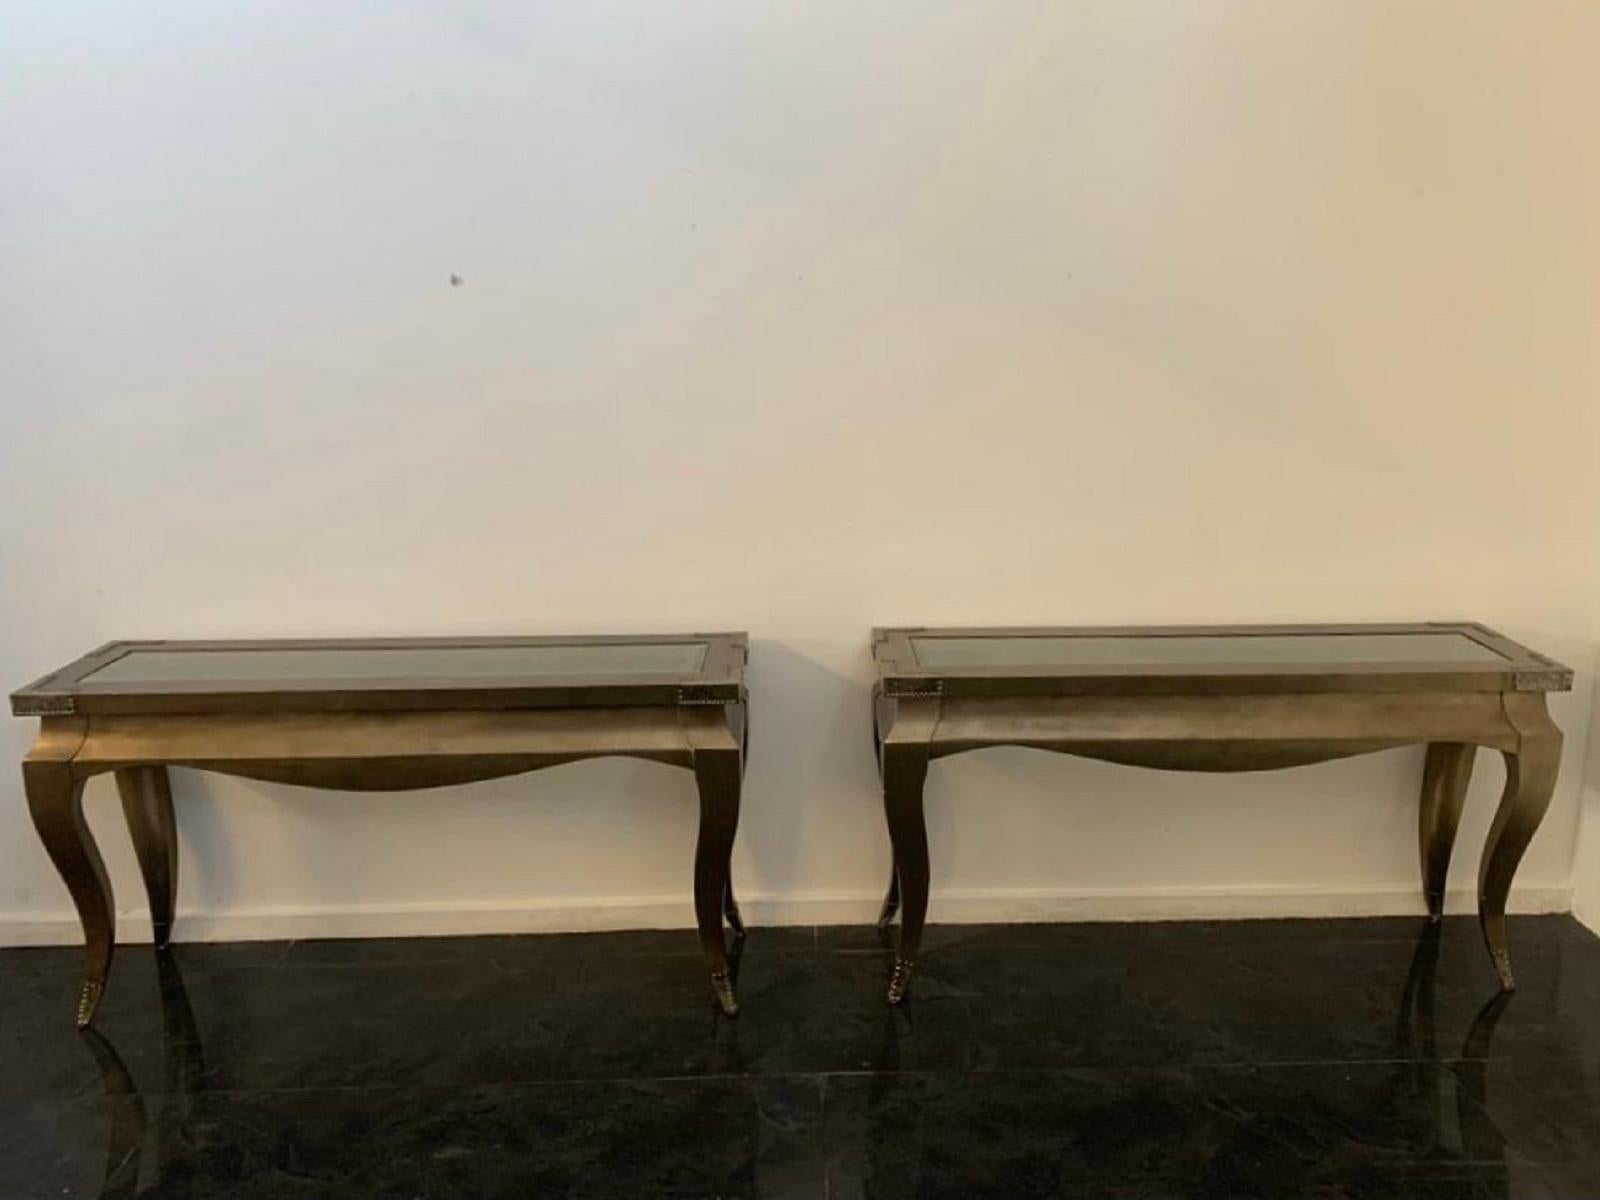 Pair of eclectic wood, glass and metal console tables, 1980s. Bronze-colored metallic finish, studded and patinated metal corners and tips.
Packaging with bubble wrap and cardboard boxes is included. If the wooden packaging is needed (fumigated